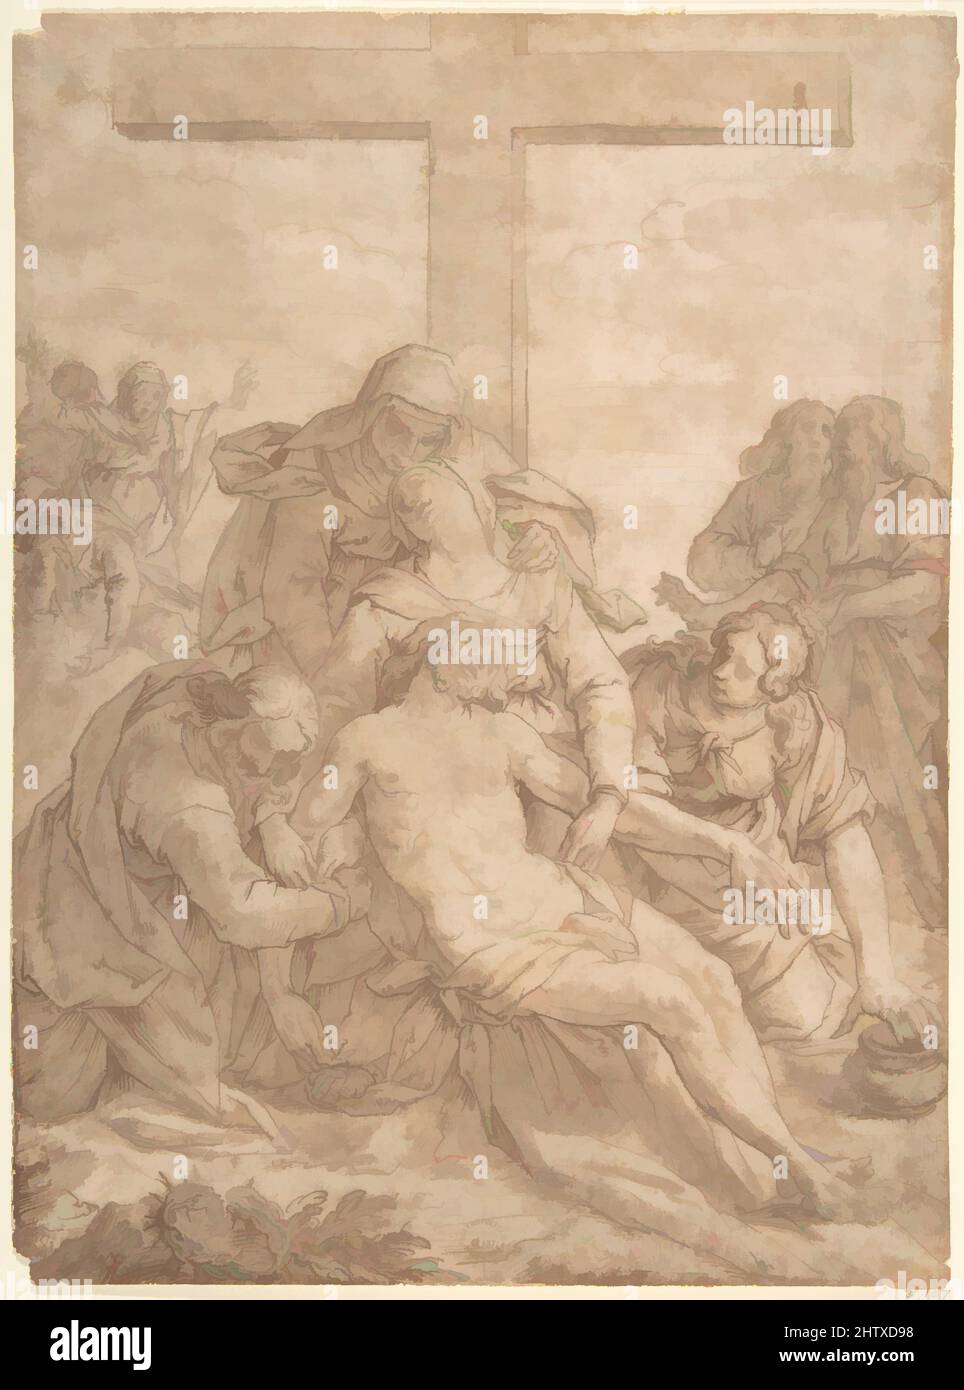 Art inspired by Descent from the Cross, 1615–16, Pen and brown ink, brush and brown wash on buff paper, 12 1/2 x 9 1/4in. (31.8 x 23.5cm), Drawings, Pasquale Ottino (Pasqualotto) (Italian, Verona 1578–1630 Verona, Classic works modernized by Artotop with a splash of modernity. Shapes, color and value, eye-catching visual impact on art. Emotions through freedom of artworks in a contemporary way. A timeless message pursuing a wildly creative new direction. Artists turning to the digital medium and creating the Artotop NFT Stock Photo